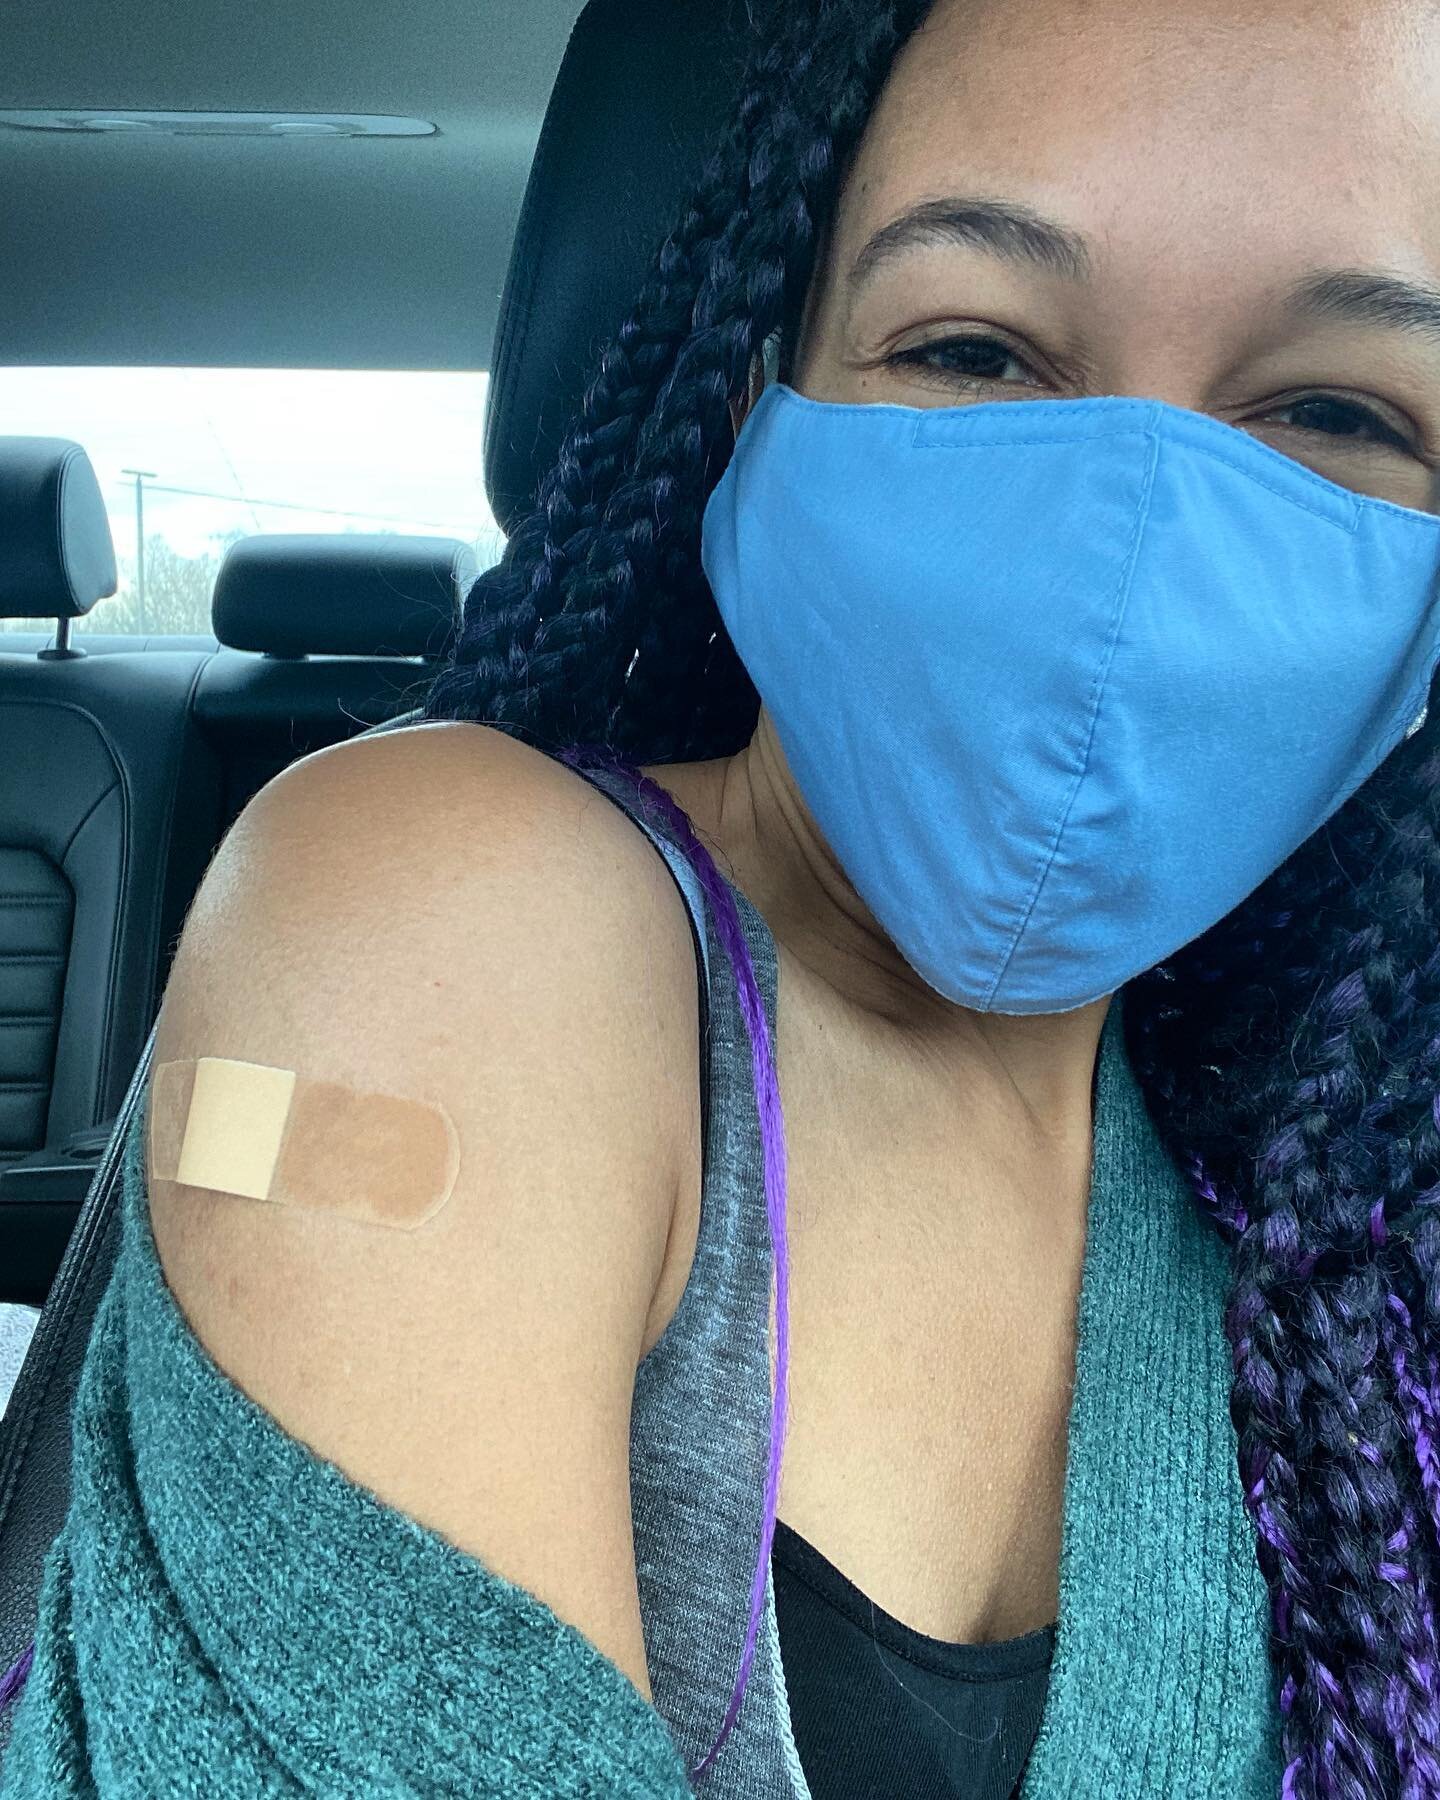 Step 1 of 2 🩹🙌🏽 Very strange to go to my former high school to get my first Moderna vaccine shot - I remember it being much bigger when I had to run the perimeter of the basketball court for gym drills?? Anyway, shout out to Medicine and Science, 